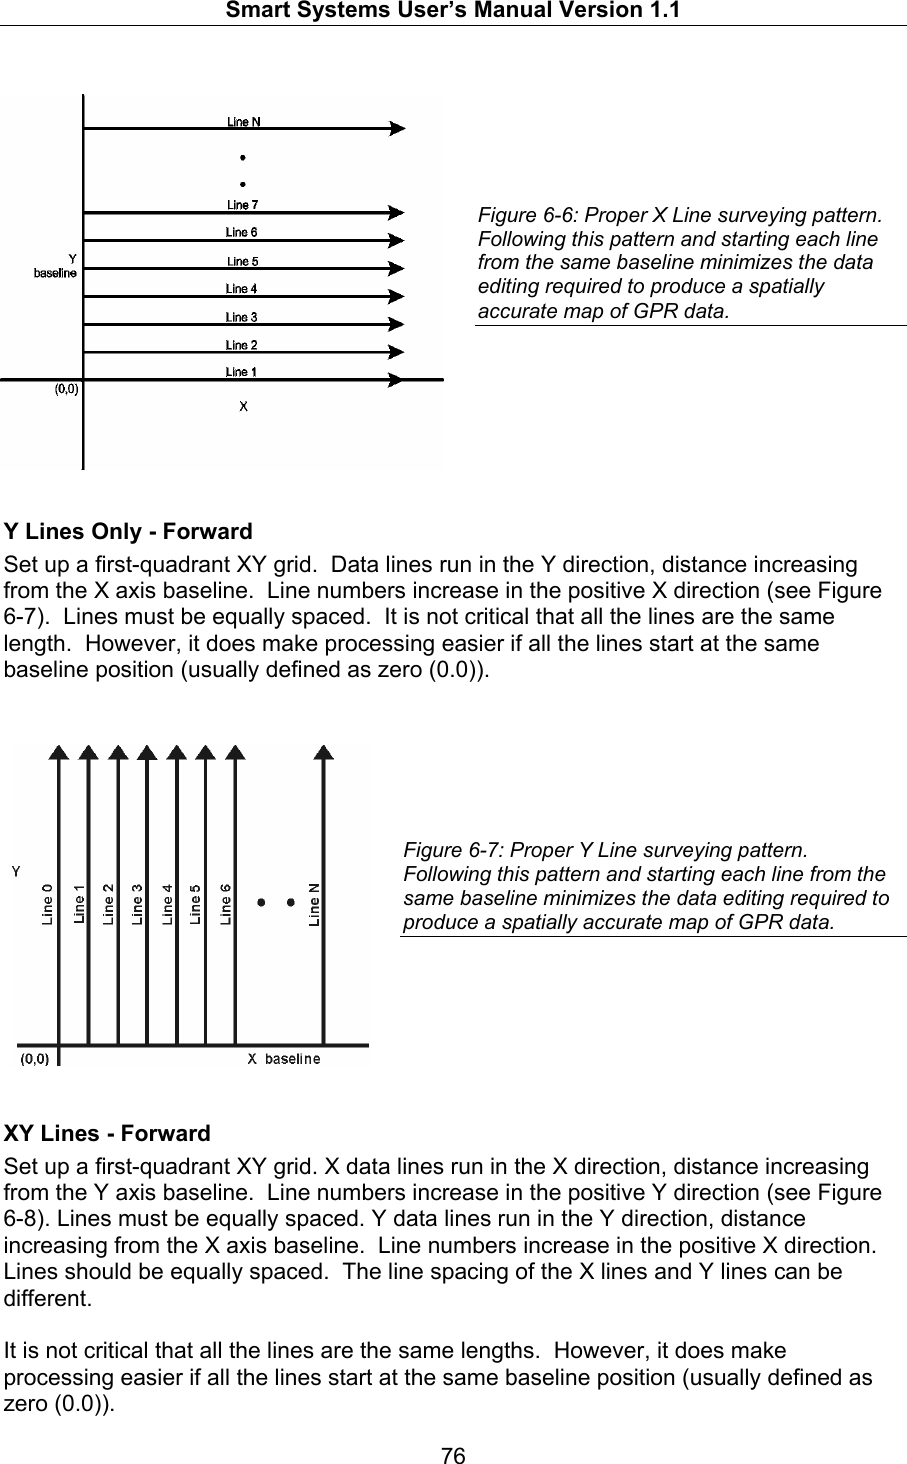   Smart Systems User’s Manual Version 1.1  76       Figure 6-6: Proper X Line surveying pattern.  Following this pattern and starting each line from the same baseline minimizes the data editing required to produce a spatially accurate map of GPR data.        Y Lines Only - Forward Set up a first-quadrant XY grid.  Data lines run in the Y direction, distance increasing from the X axis baseline.  Line numbers increase in the positive X direction (see Figure 6-7).  Lines must be equally spaced.  It is not critical that all the lines are the same length.  However, it does make processing easier if all the lines start at the same baseline position (usually defined as zero (0.0)).       Figure 6-7: Proper Y Line surveying pattern.  Following this pattern and starting each line from the same baseline minimizes the data editing required to produce a spatially accurate map of GPR data.       XY Lines - Forward Set up a first-quadrant XY grid. X data lines run in the X direction, distance increasing from the Y axis baseline.  Line numbers increase in the positive Y direction (see Figure 6-8). Lines must be equally spaced. Y data lines run in the Y direction, distance increasing from the X axis baseline.  Line numbers increase in the positive X direction. Lines should be equally spaced.  The line spacing of the X lines and Y lines can be different.  It is not critical that all the lines are the same lengths.  However, it does make processing easier if all the lines start at the same baseline position (usually defined as zero (0.0)).   